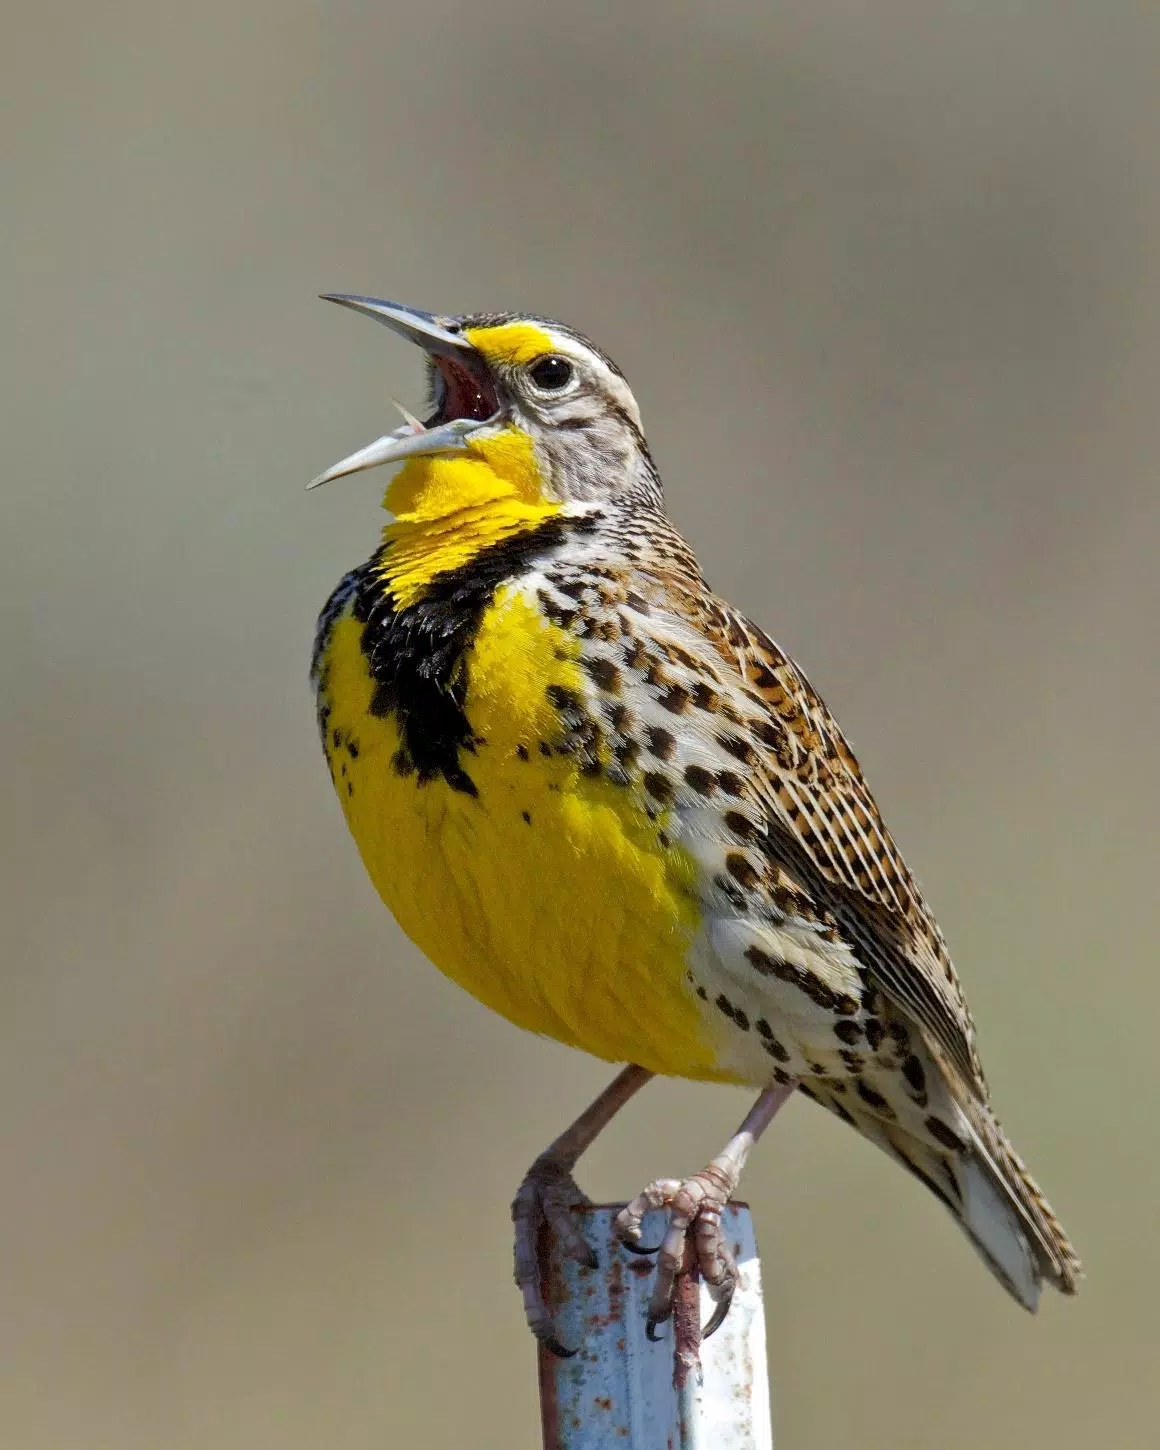 Appp.io - Meadowlark bird sounds for Android - APK Download